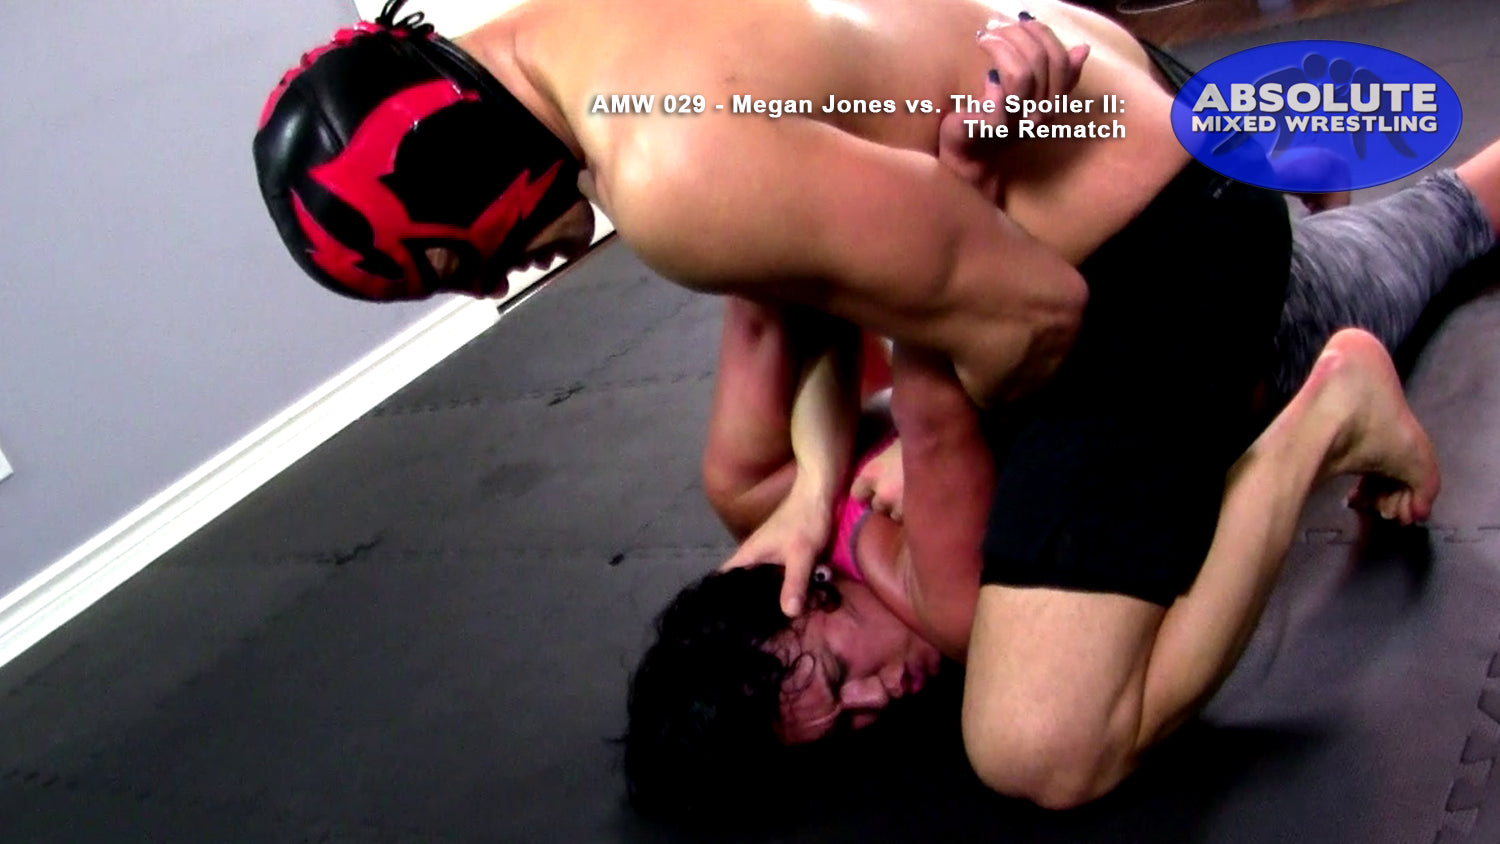 Megan Jones The Spoiler man vs woman intergender apartment submission Absolute Mixed Wrestling arm-bar